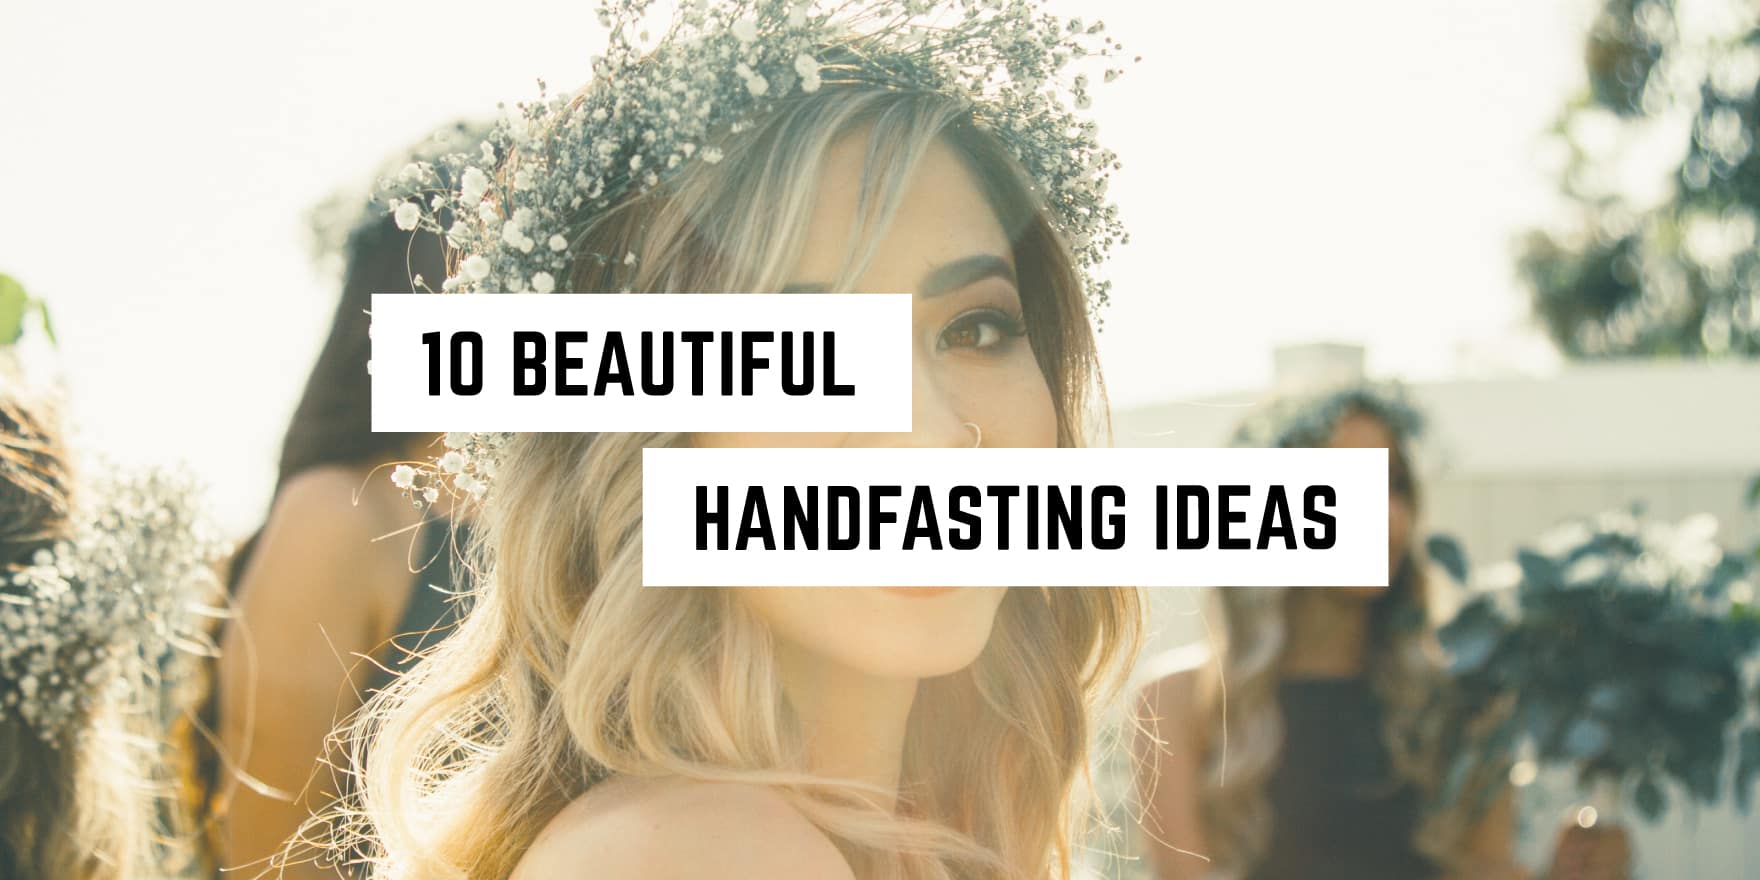 A woman with a floral crown smiling at a festive outdoor event with text overlay reading "10 beautiful handfasting ideas for your metaphysical shop.